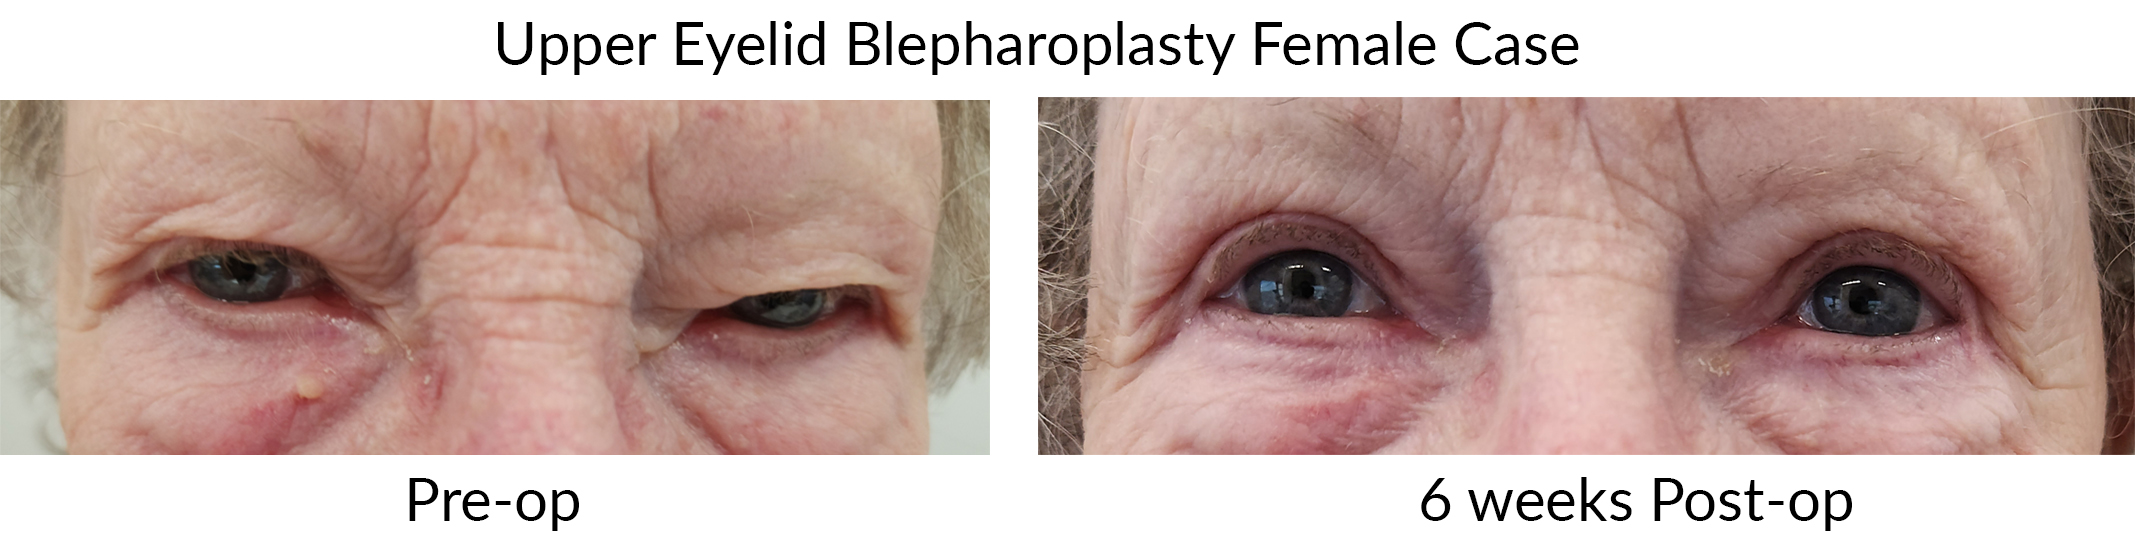 Case Example of Before and After Blepharoplasty